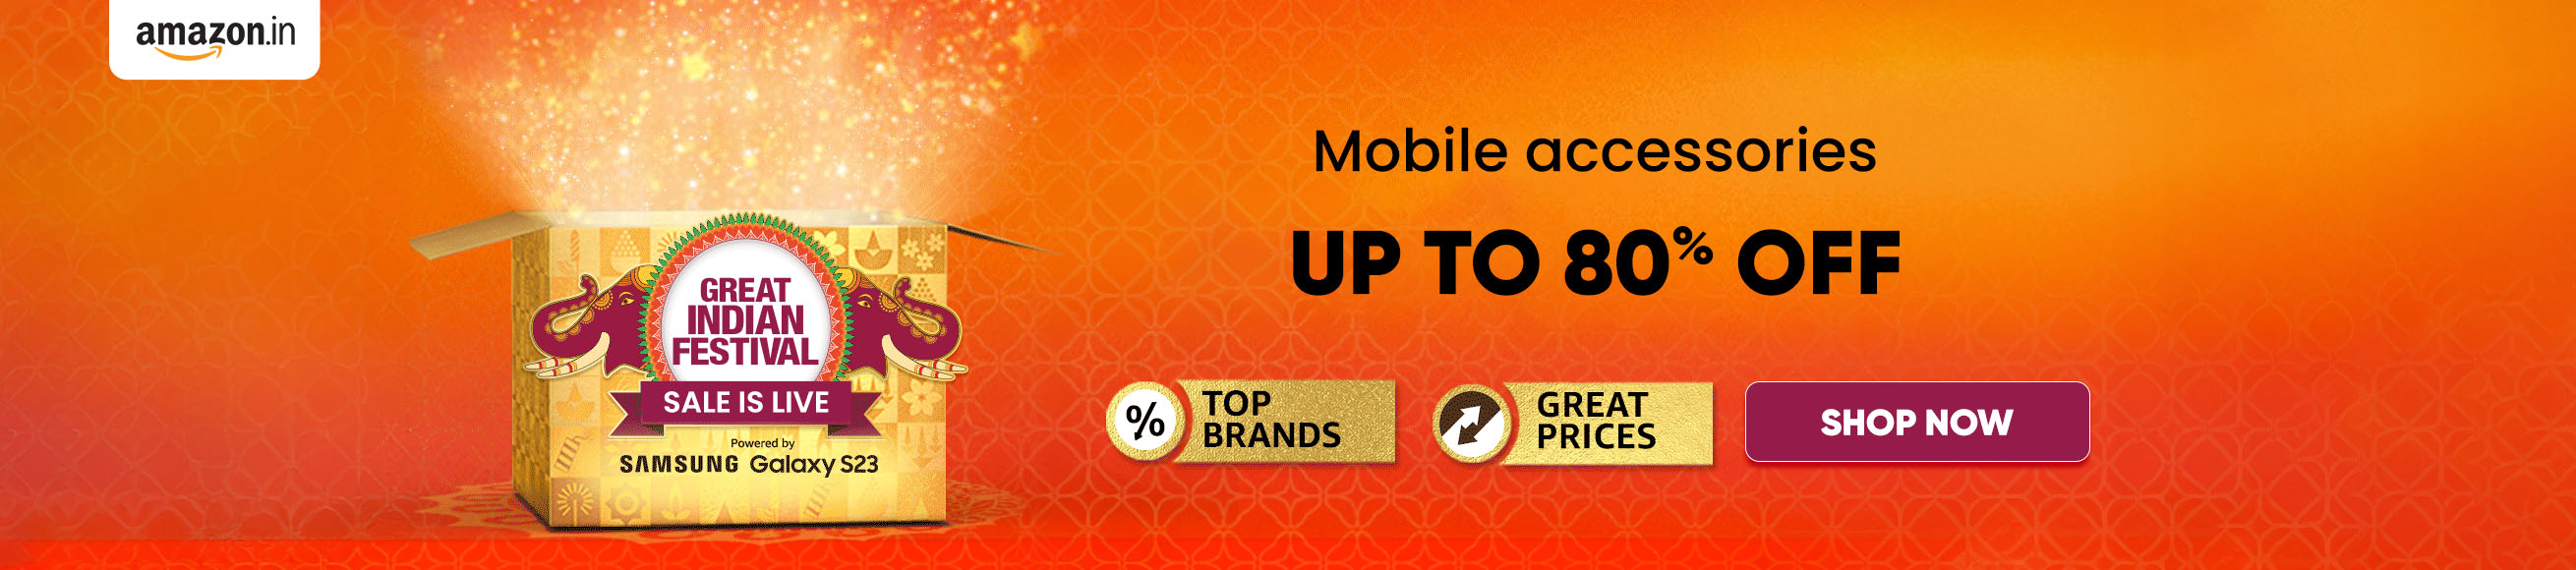 Amazon Diwali Offers on Mobile & Accessories